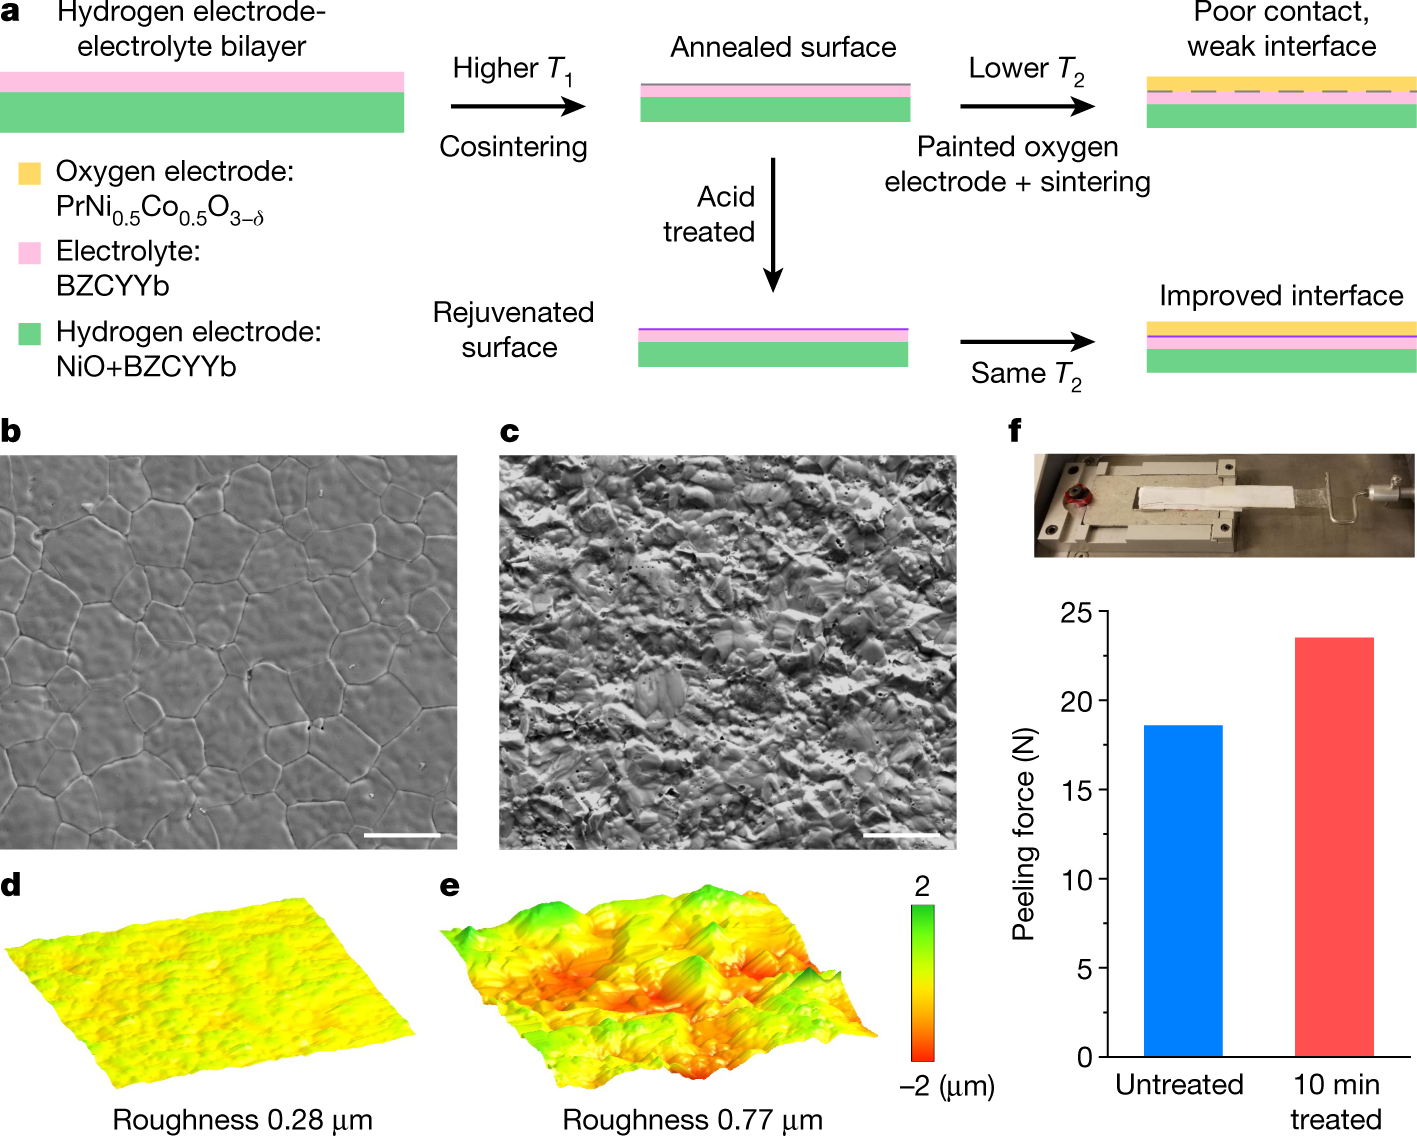 Revitalizing interface in protonic ceramic cells by acid etch | Nature